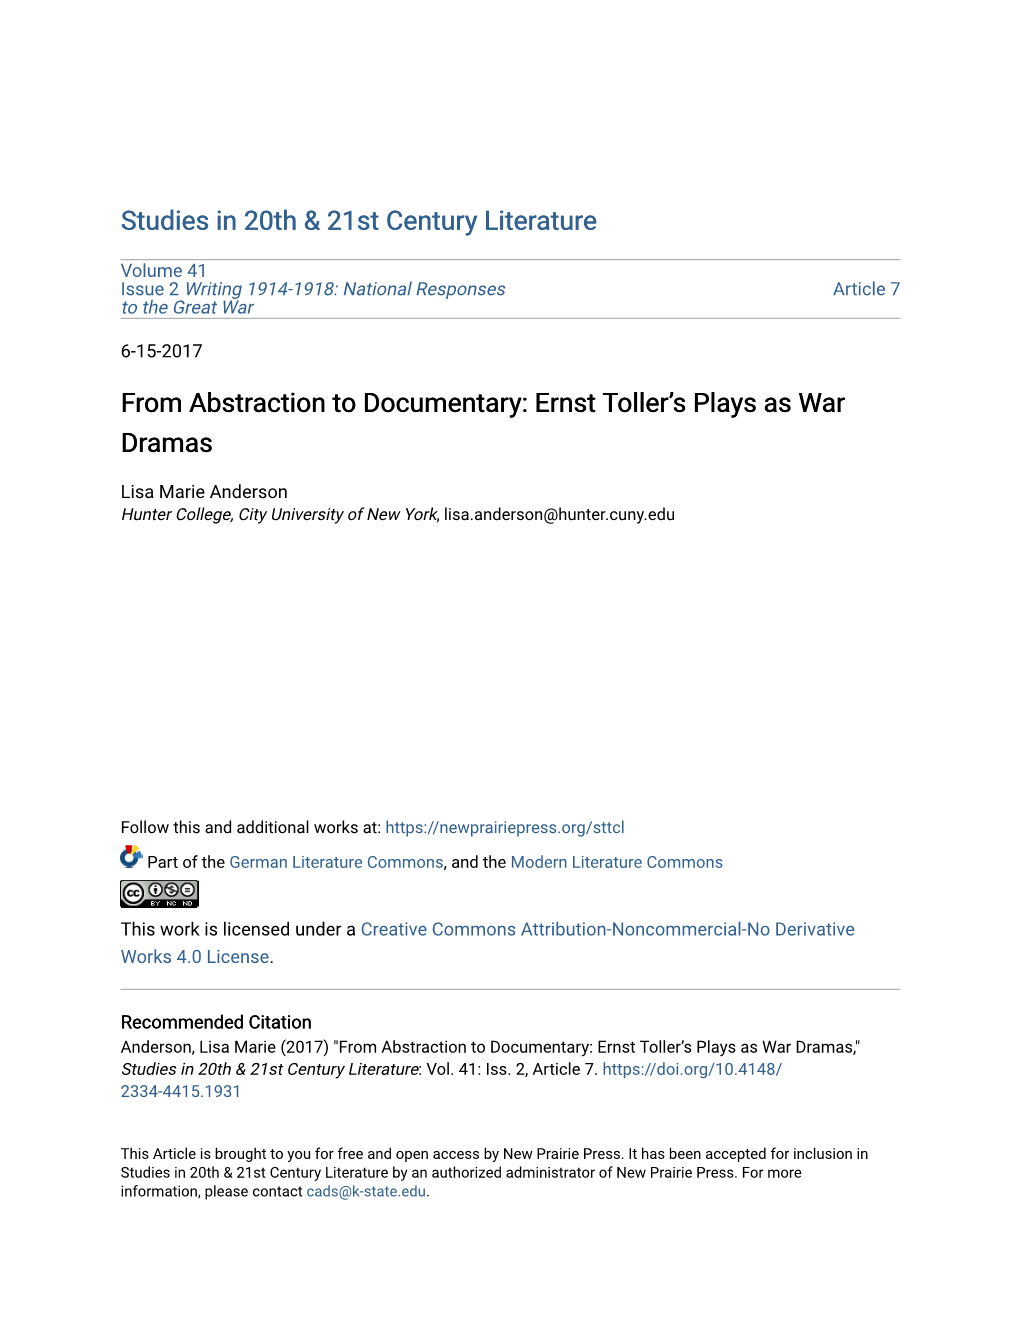 From Abstraction to Documentary: Ernst Toller's Plays As War Dramas